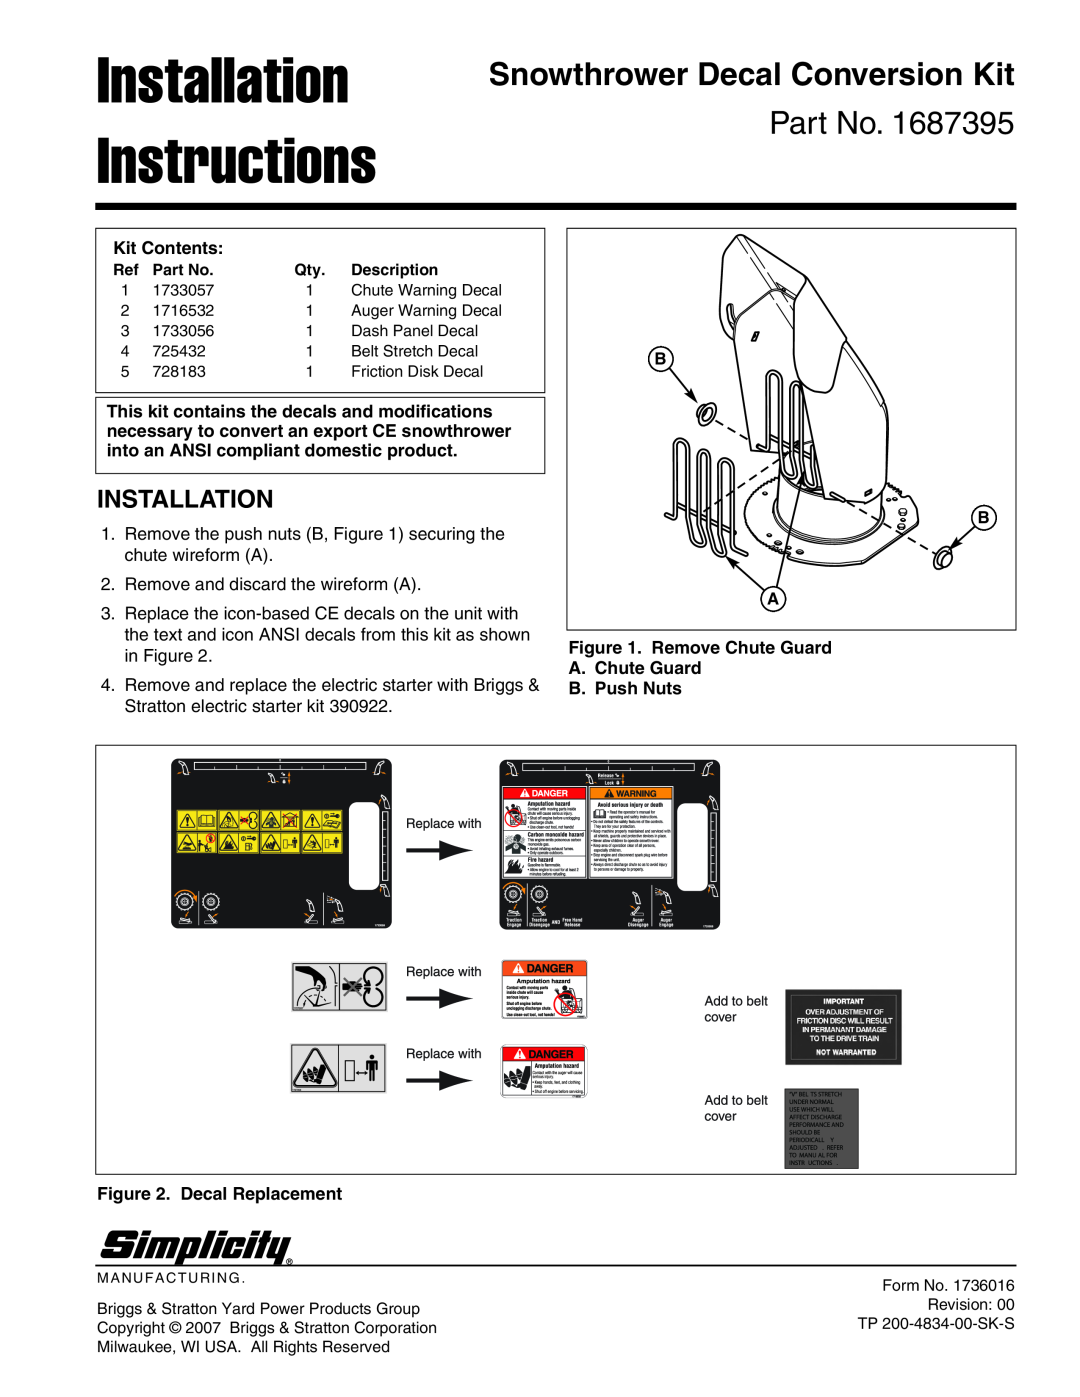 Simplicity 1687395 installation instructions Installation Instructions, Snowthrower Decal Conversion Kit, Kit Contents 